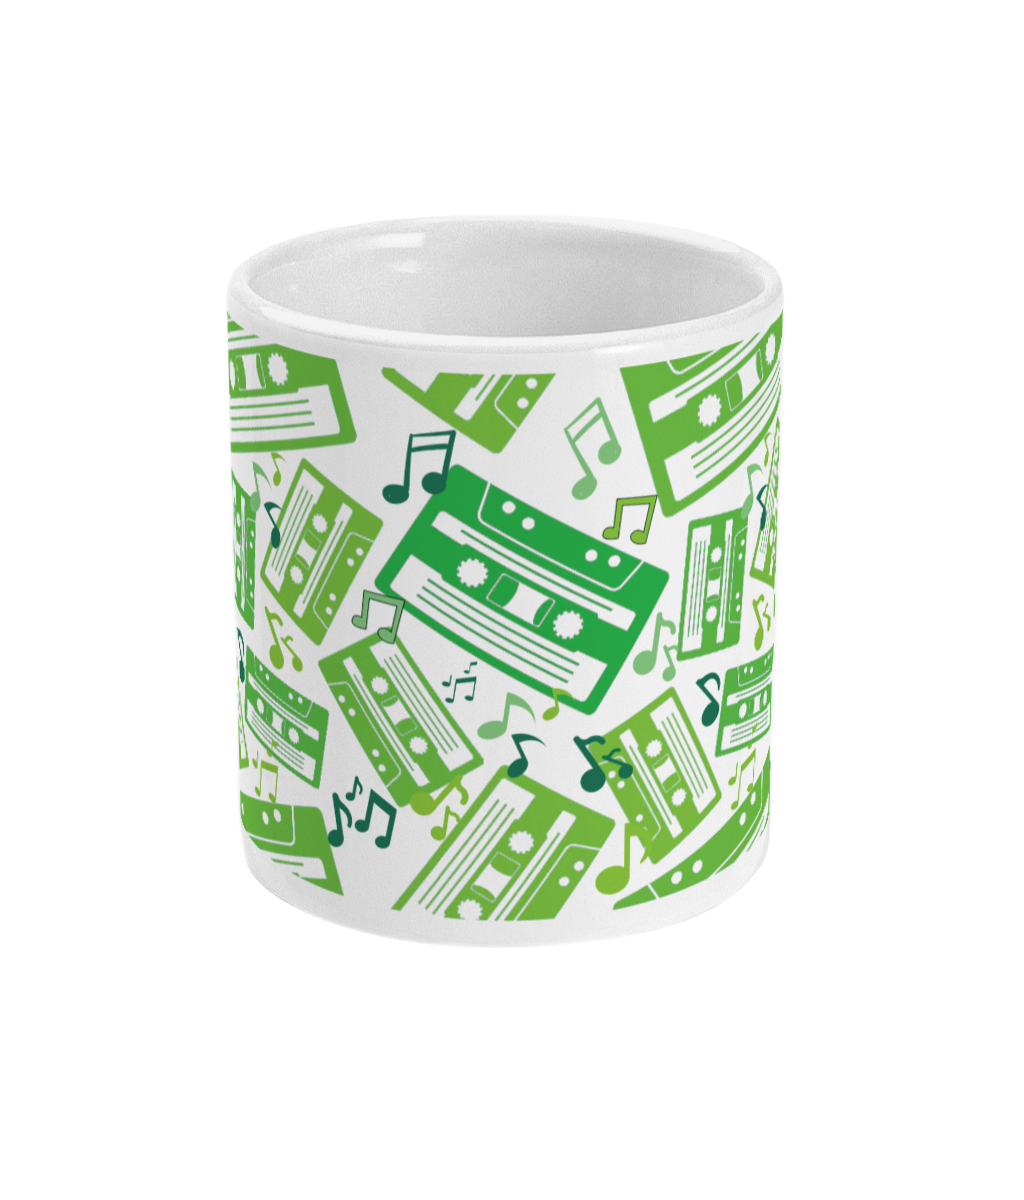 White mug with green toned music notes and cassette tapes spread out at different angles in different shades of green around the sides and front.